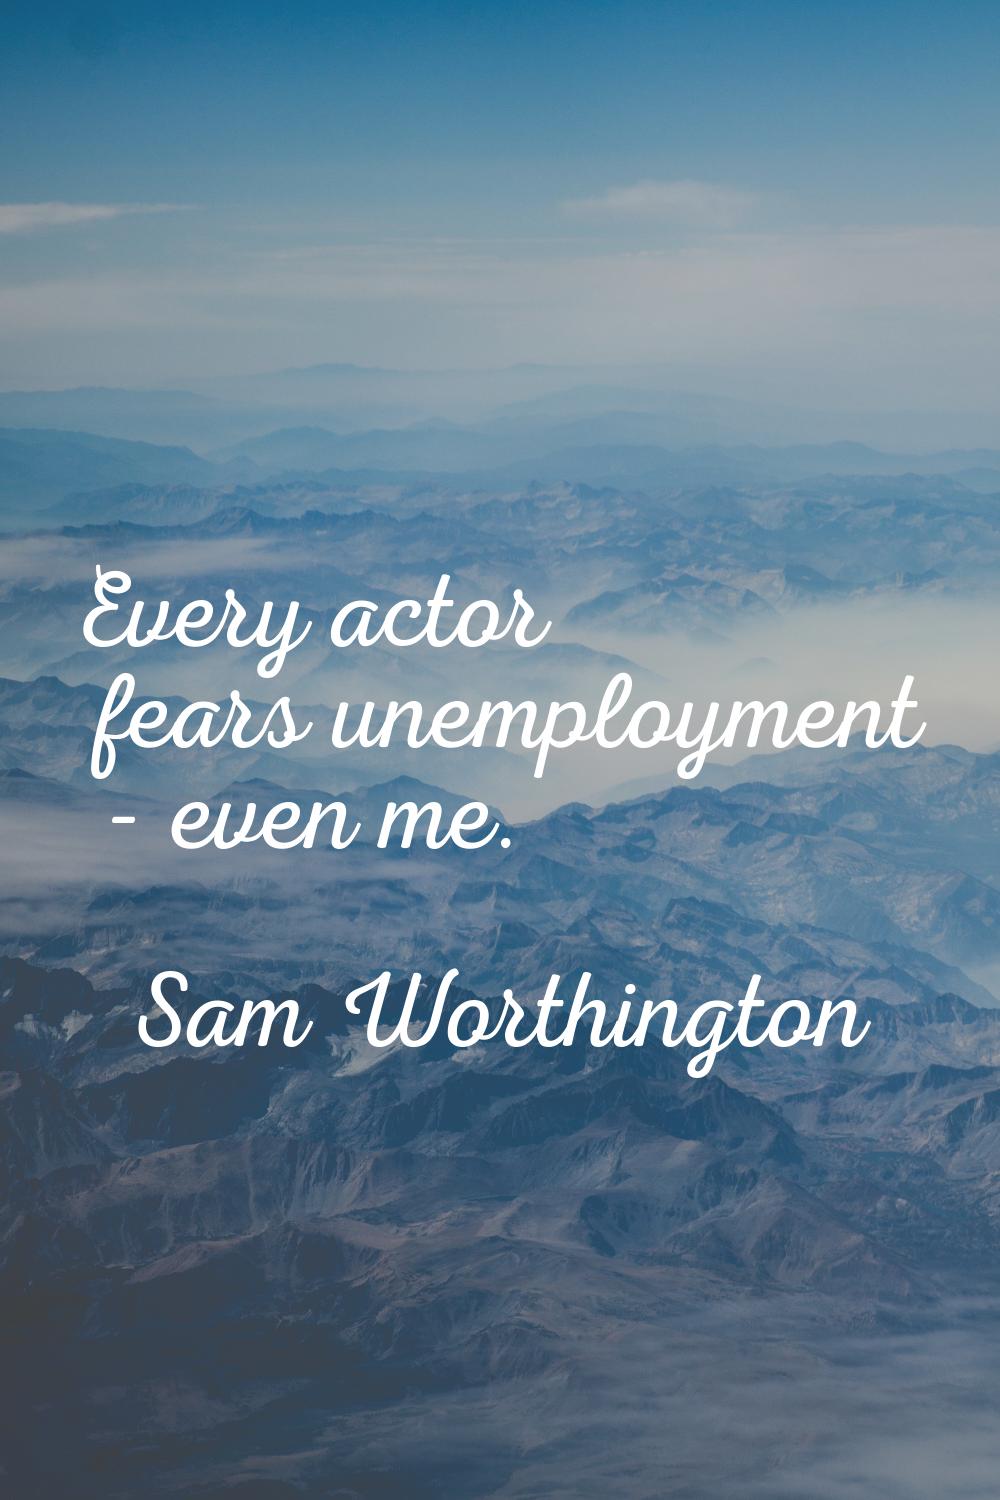 Every actor fears unemployment - even me.